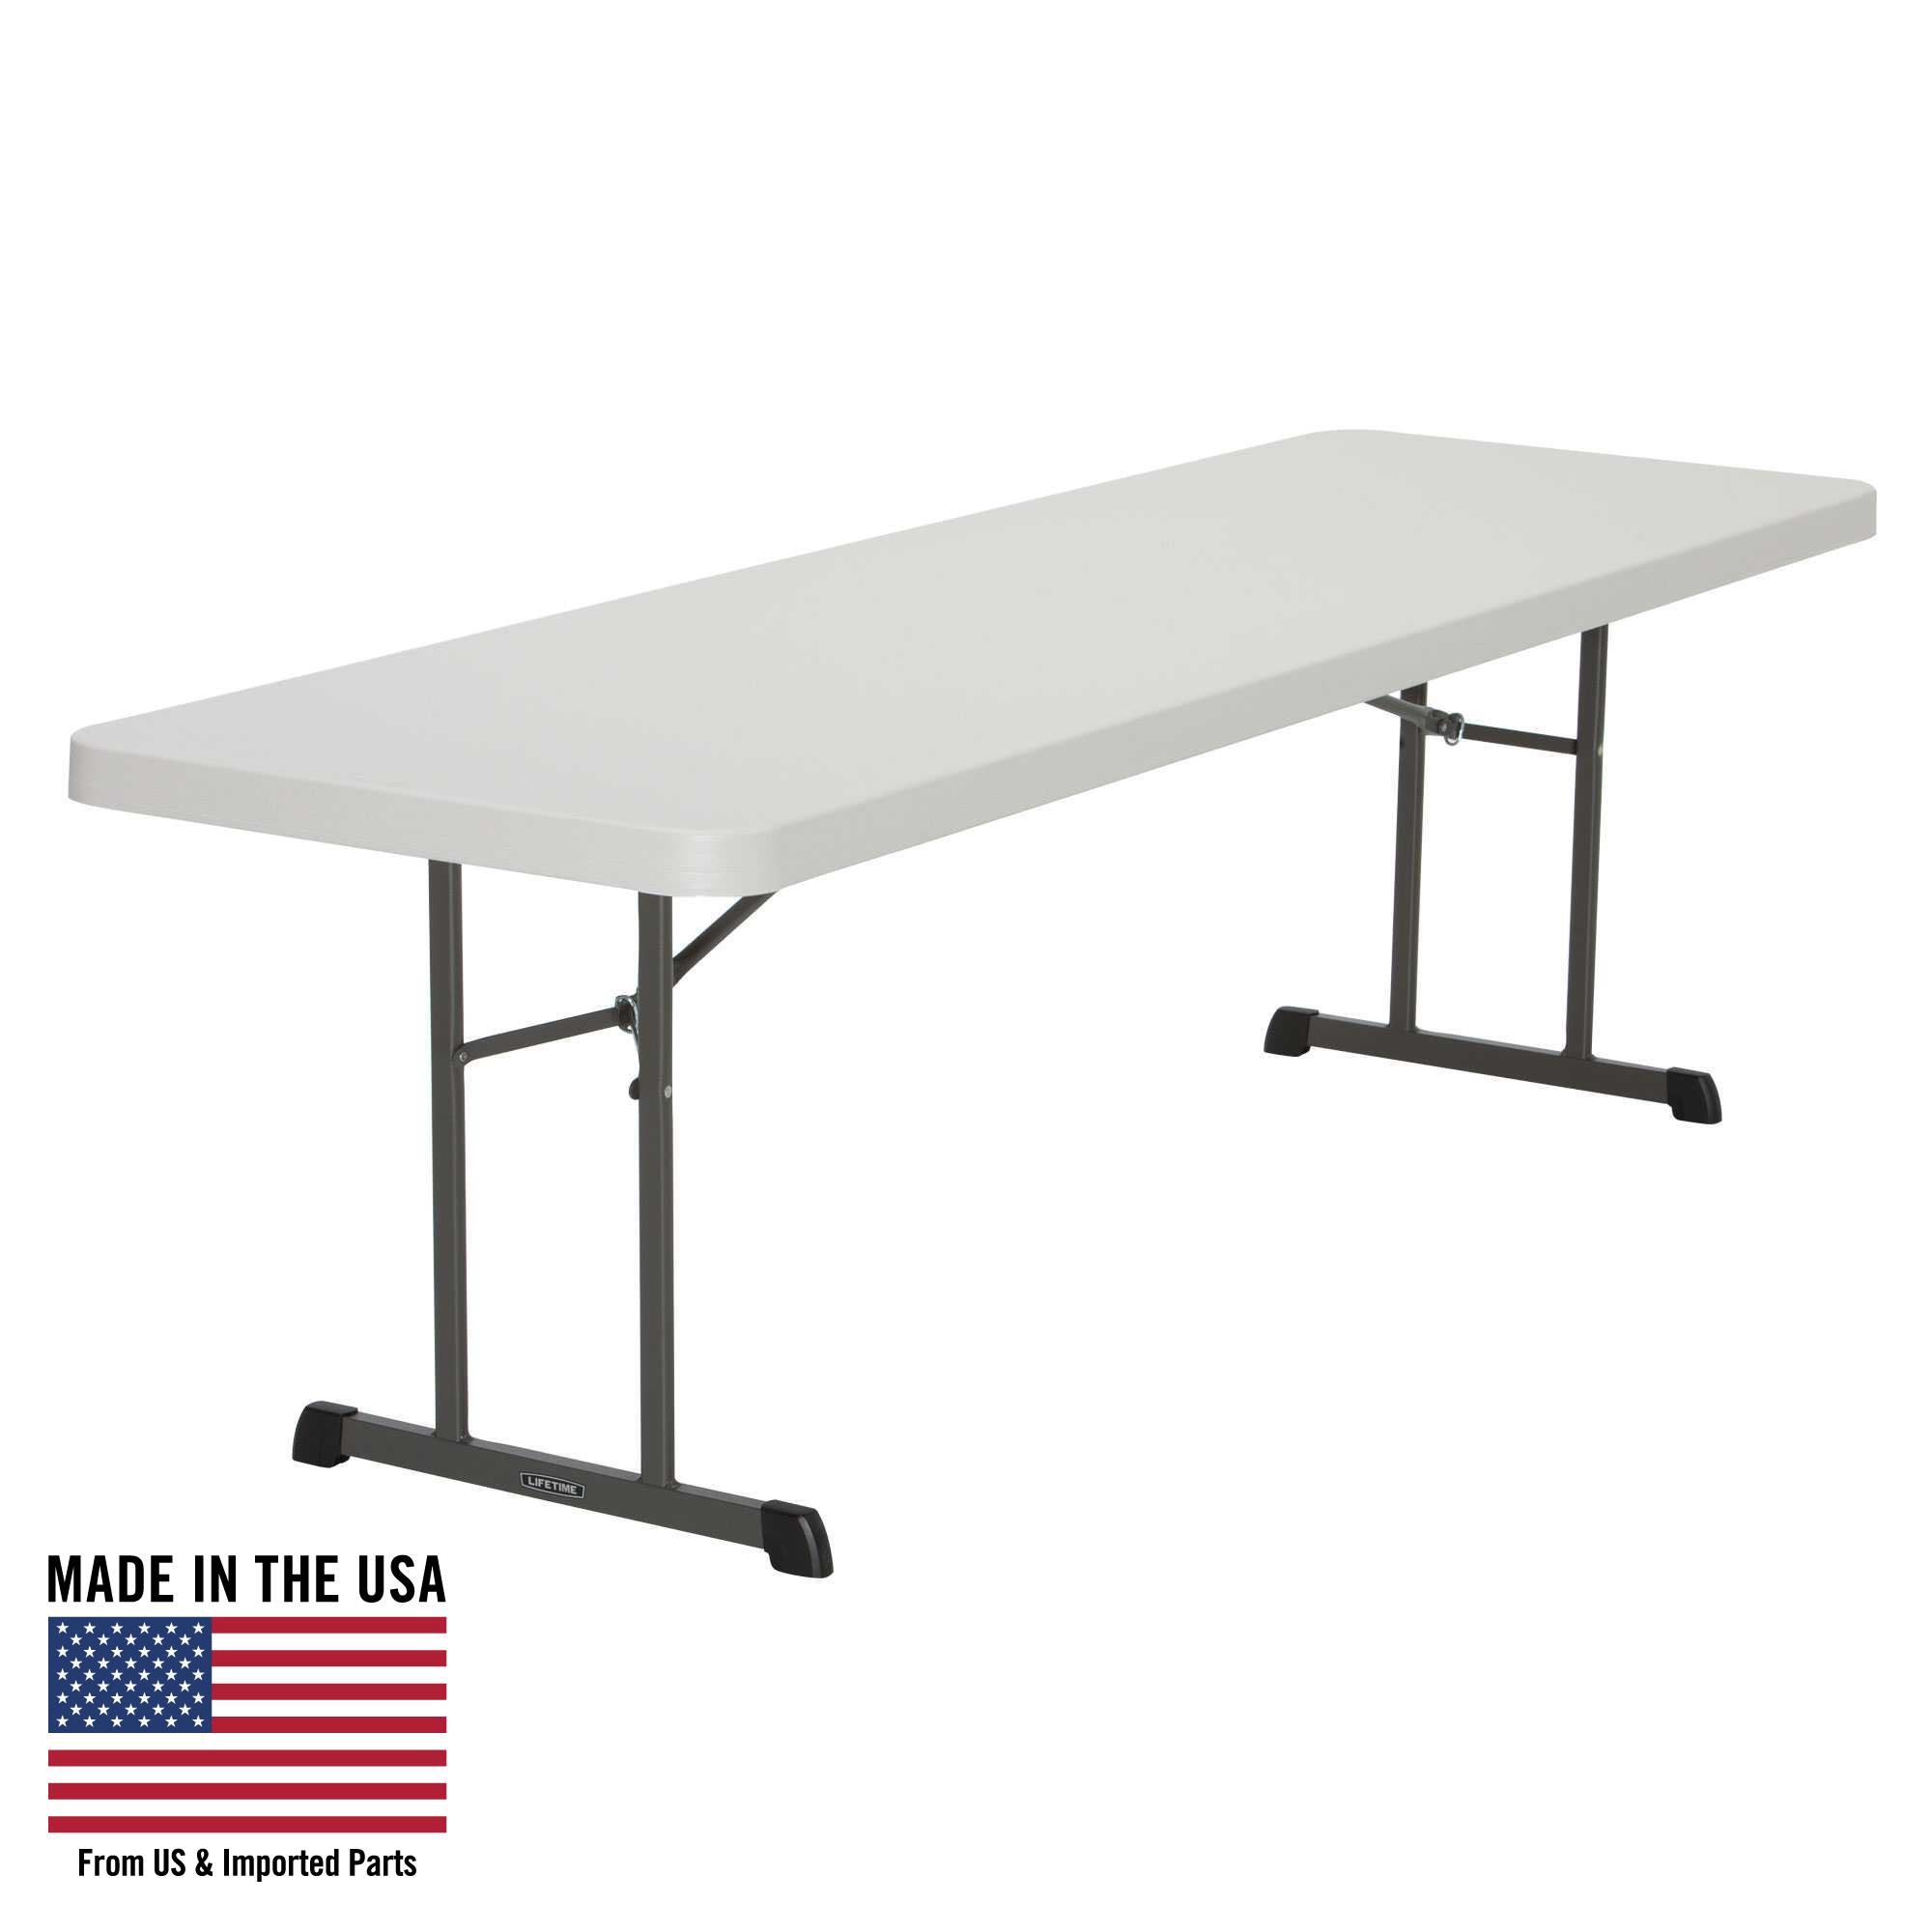 Lifetime 8 Foot Rectangle Folding Table Indoor/Outdoor Professional Grade, Almond (80250) - image 1 of 10